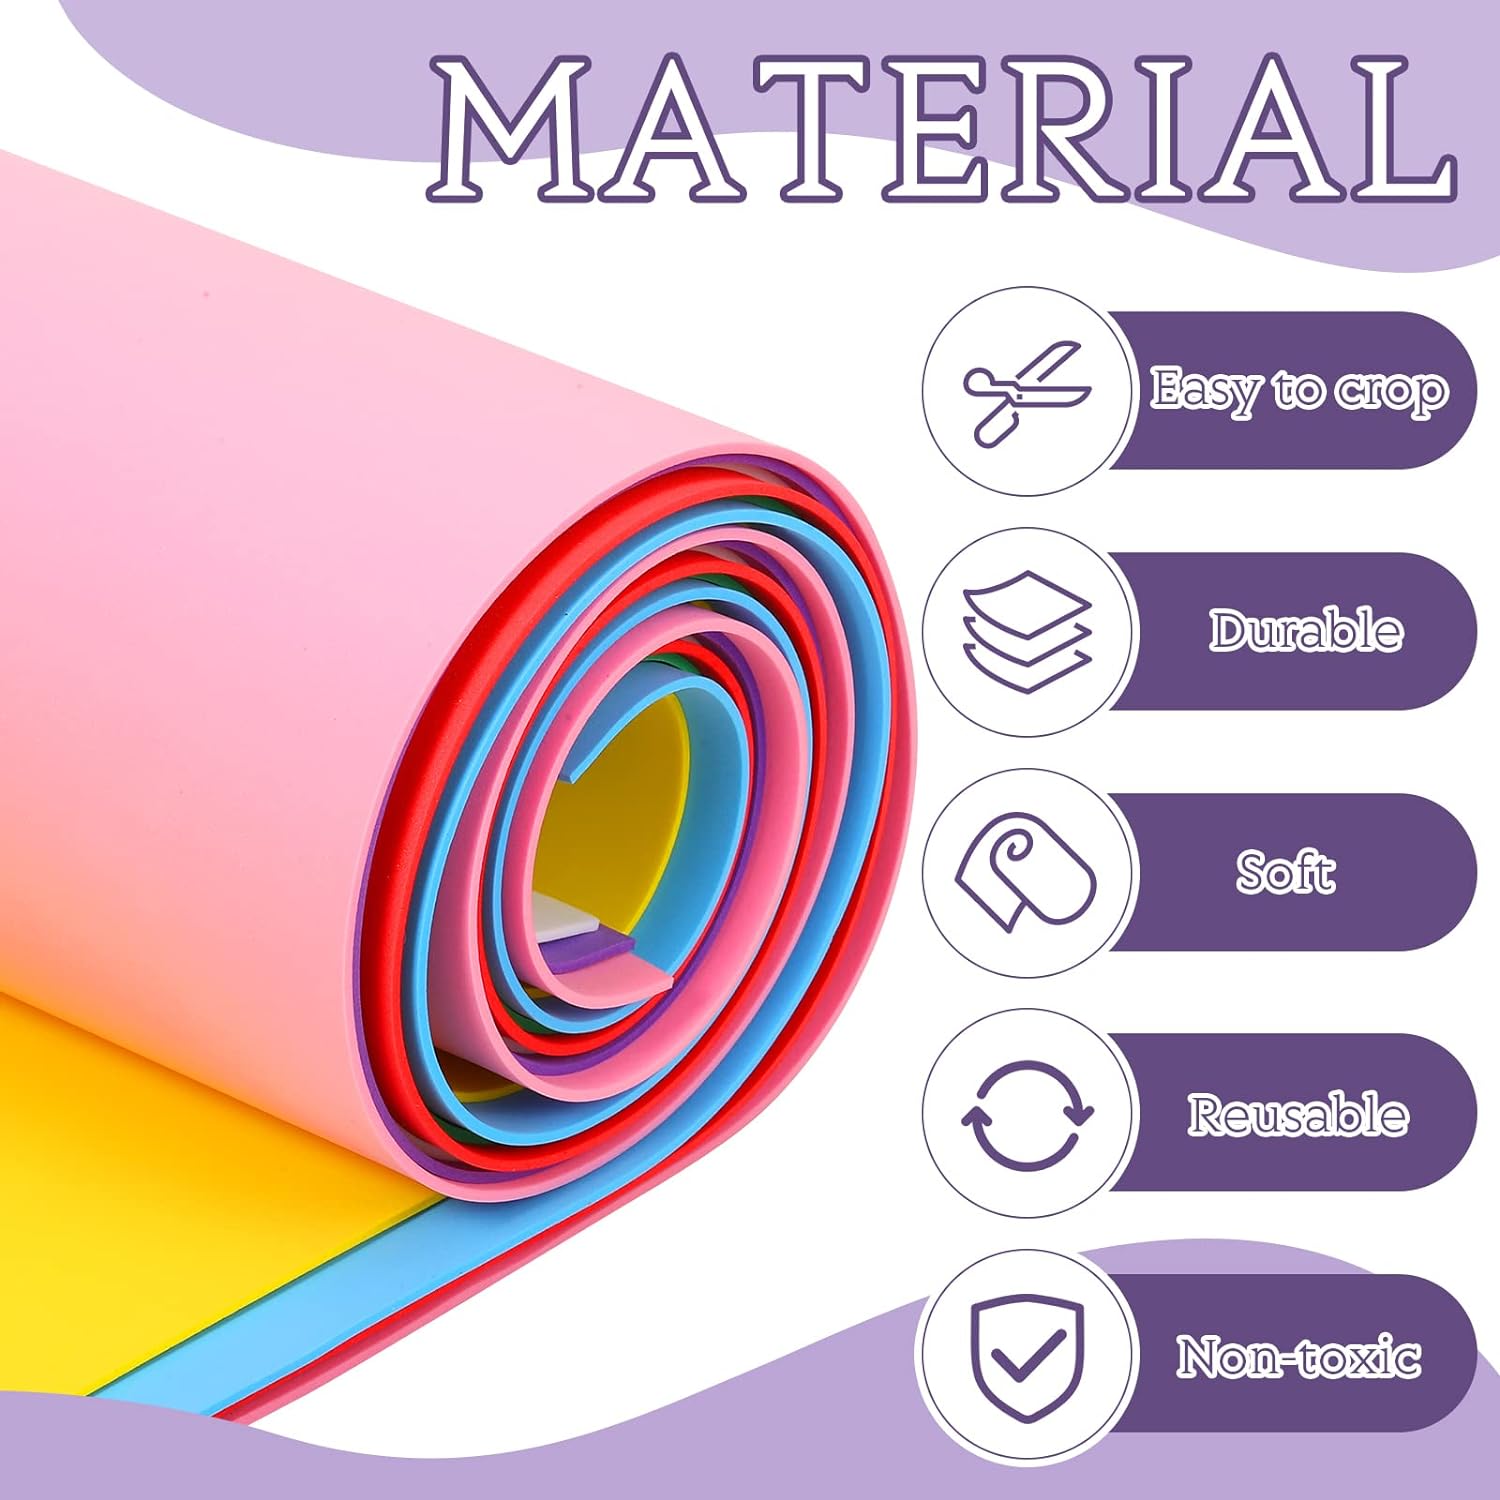 8 Pcs Craft Foam Sheets Bulk 39''x13'' Colored Eva Foam Roll High Density Foam Roll For Christmas Craft Classroom Scrapbooking DIY Cosplay Costume Armor Project Classic Colors 1.5 mm Thick By PAIDU